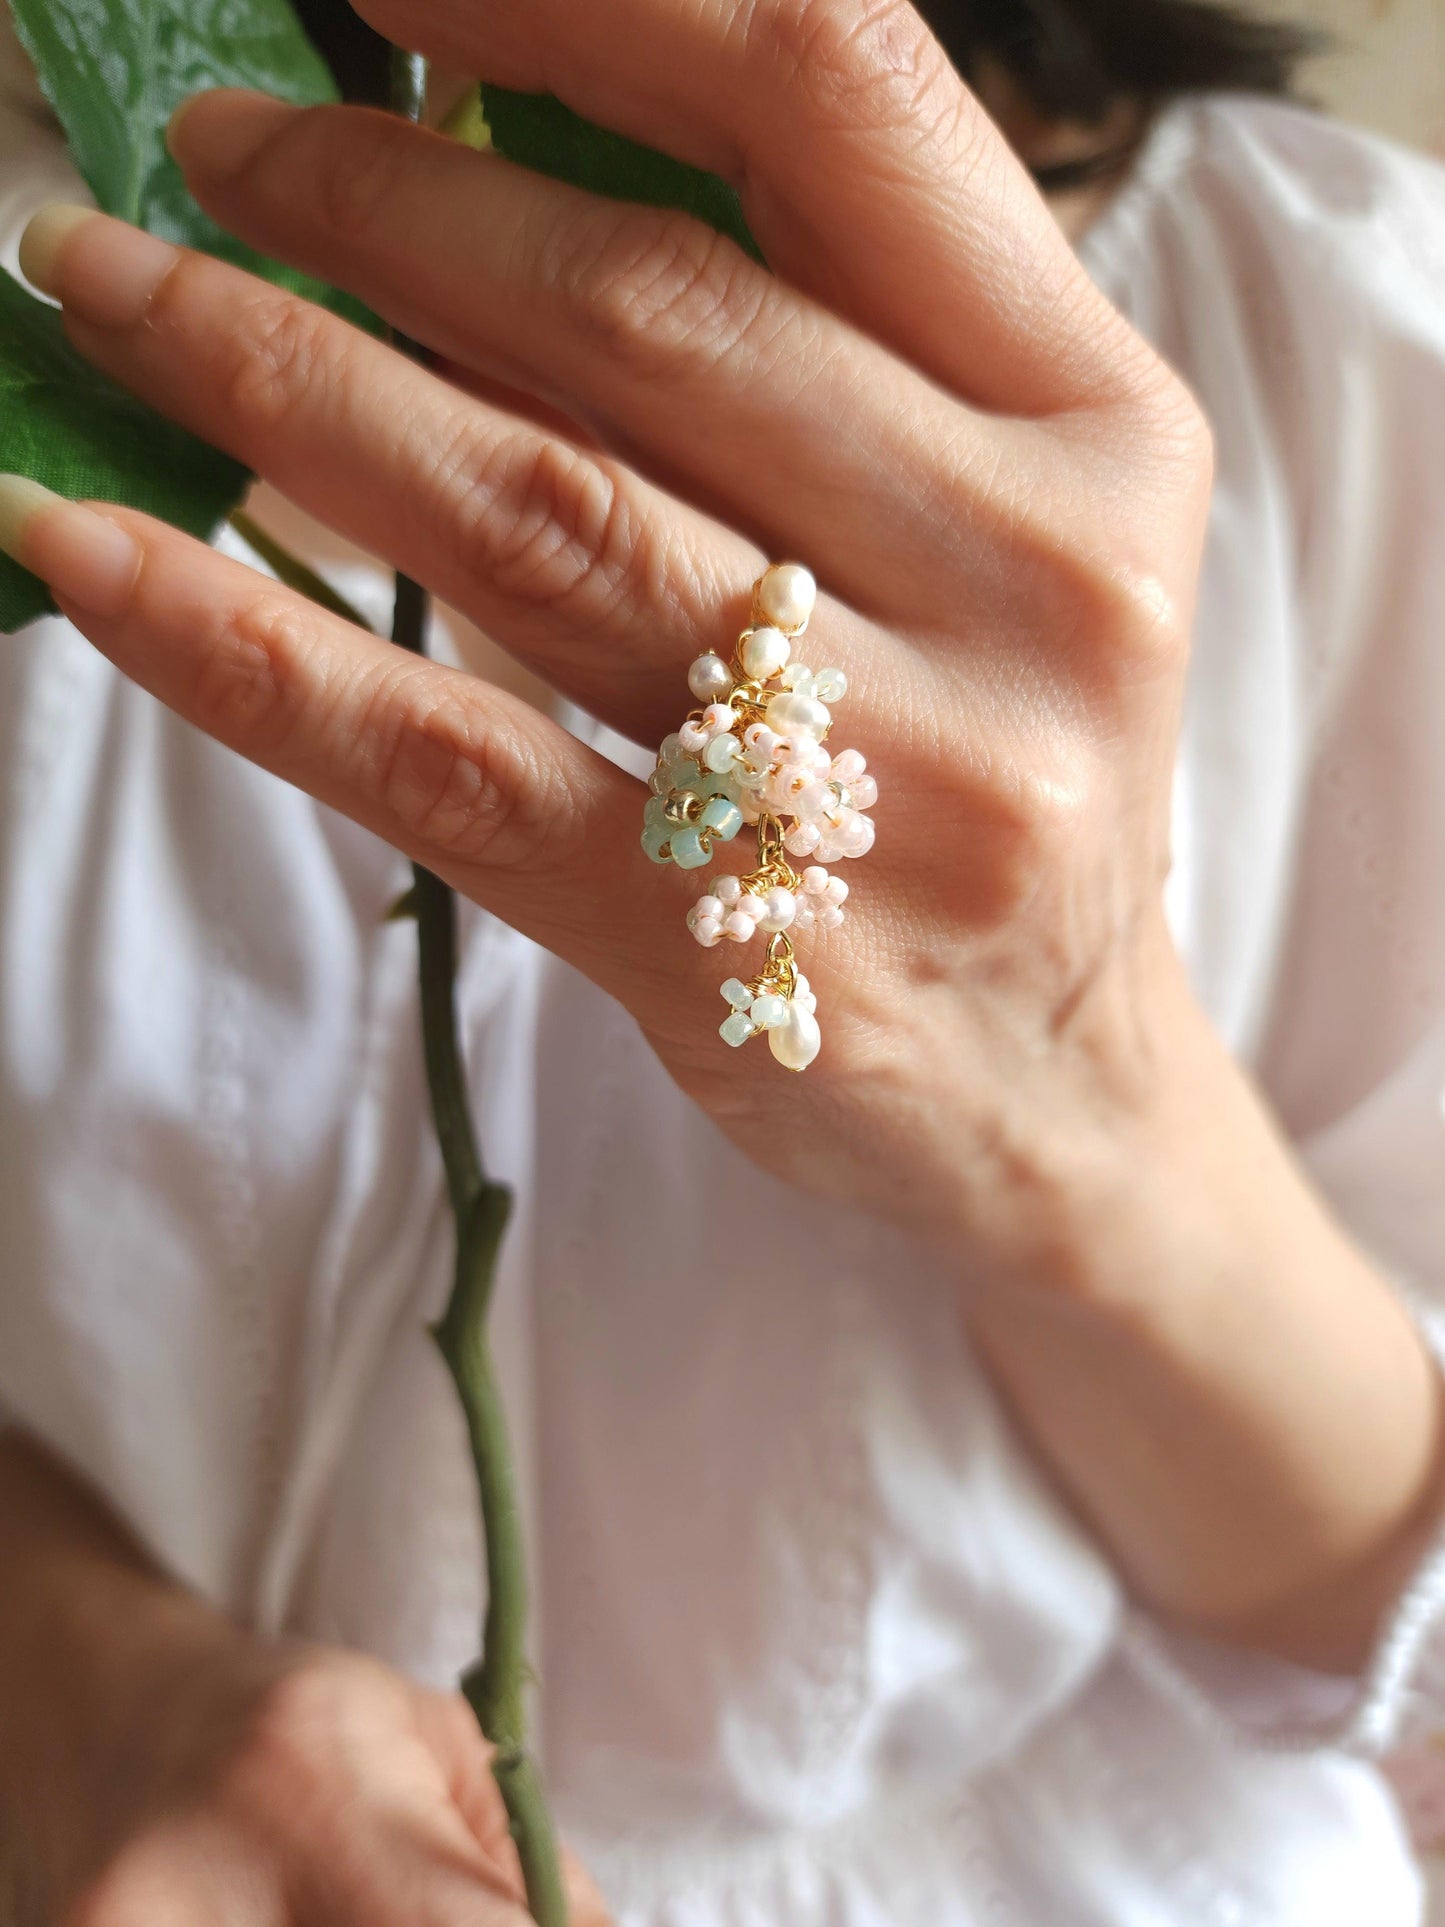 Dreamy Tides Bouquet Ring - By Cocoyu